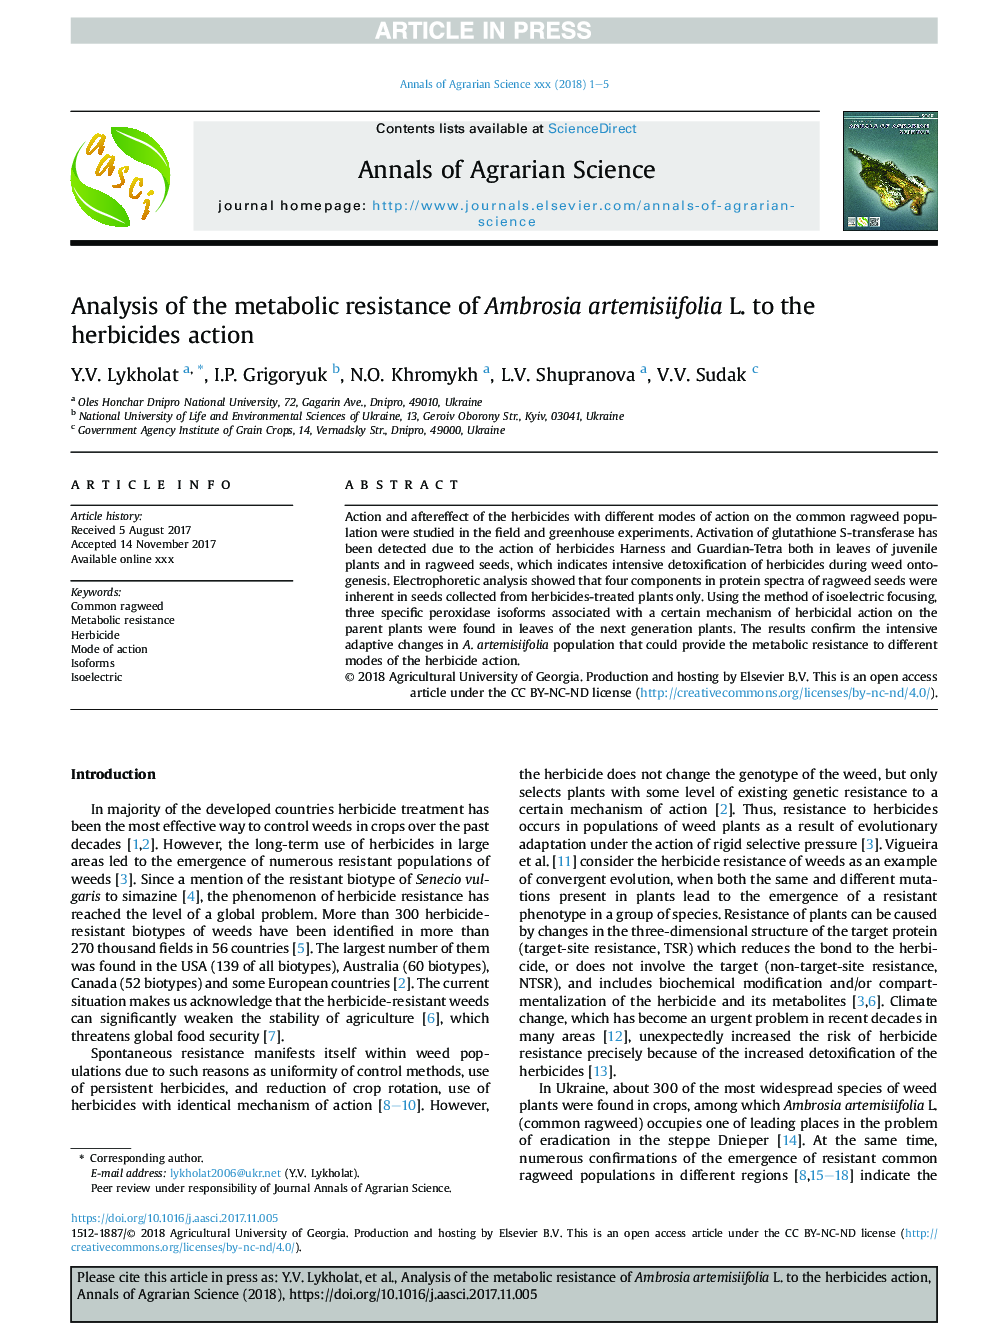 Analysis of the metabolic resistance of Ambrosia artemisiifolia L. to the herbicides action